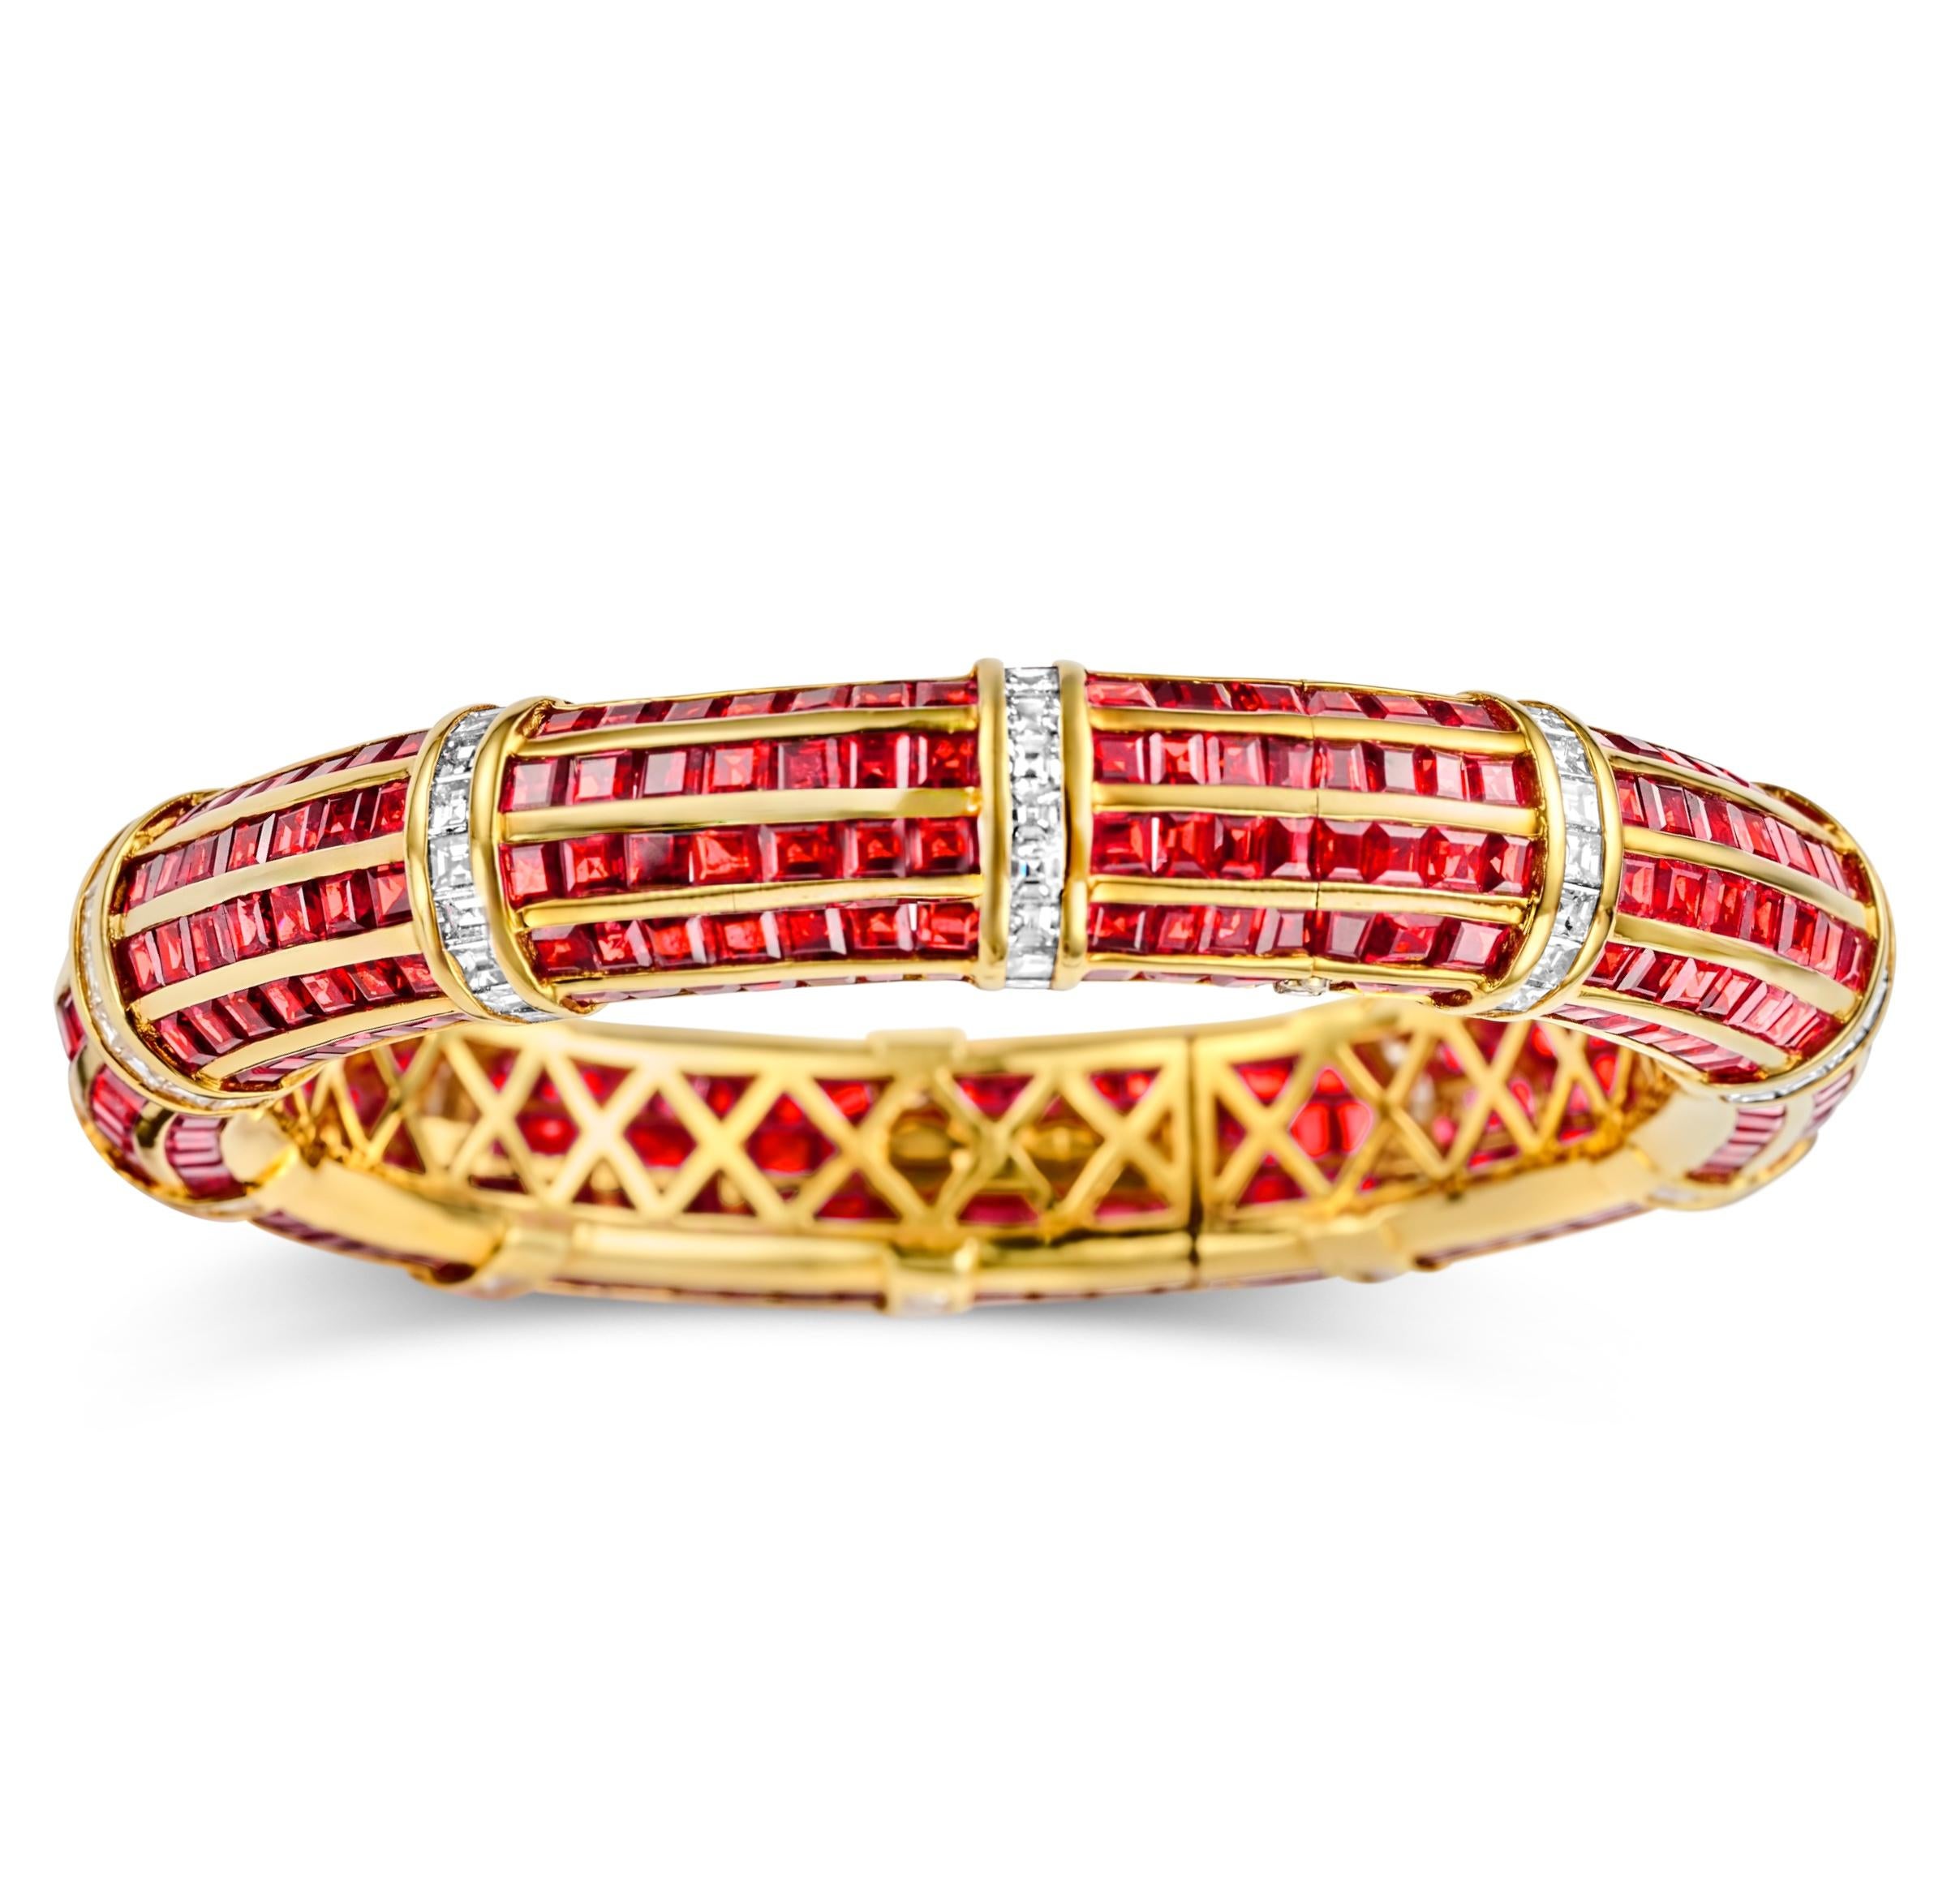 Magnificent 18kt Yellow Gold  Bangle Bracelet with Red Rubies and 5ct Square Emerald Cut Diamonds from Estate His Majesty The Sultan Of Oman Qaboos Bin Said

Rubies: 420 rubies : Ca. 30 Ct

Diamonds: Square cut diamonds, together in total approx. 5